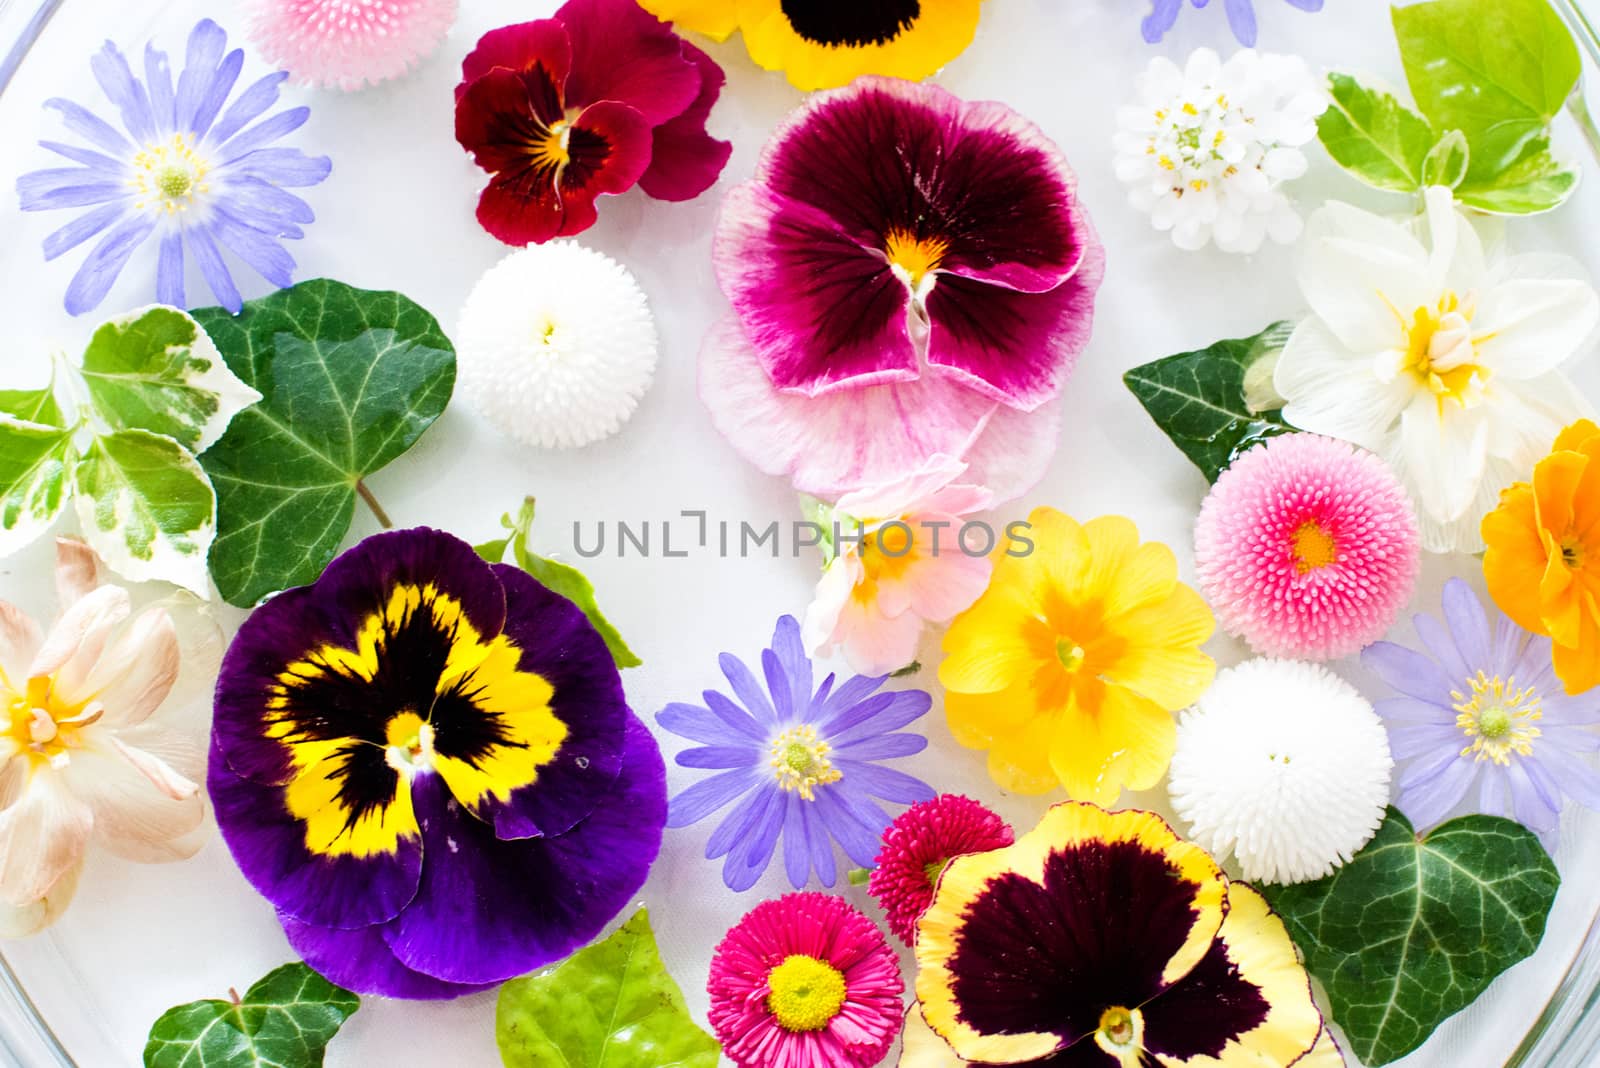 Recently picked fresh mixed flowers floating in a water jar against bright background